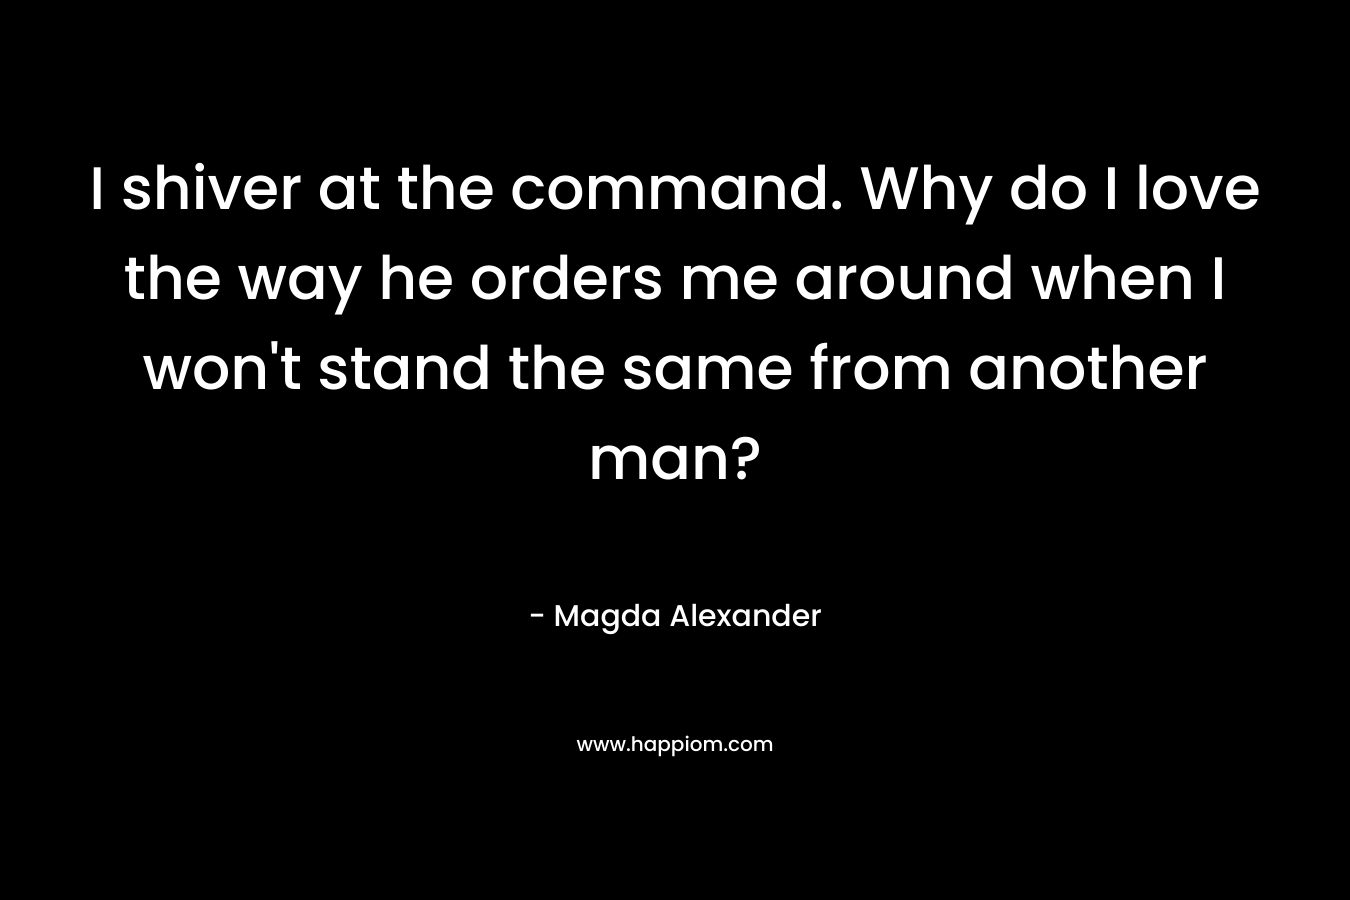 I shiver at the command. Why do I love the way he orders me around when I won't stand the same from another man?